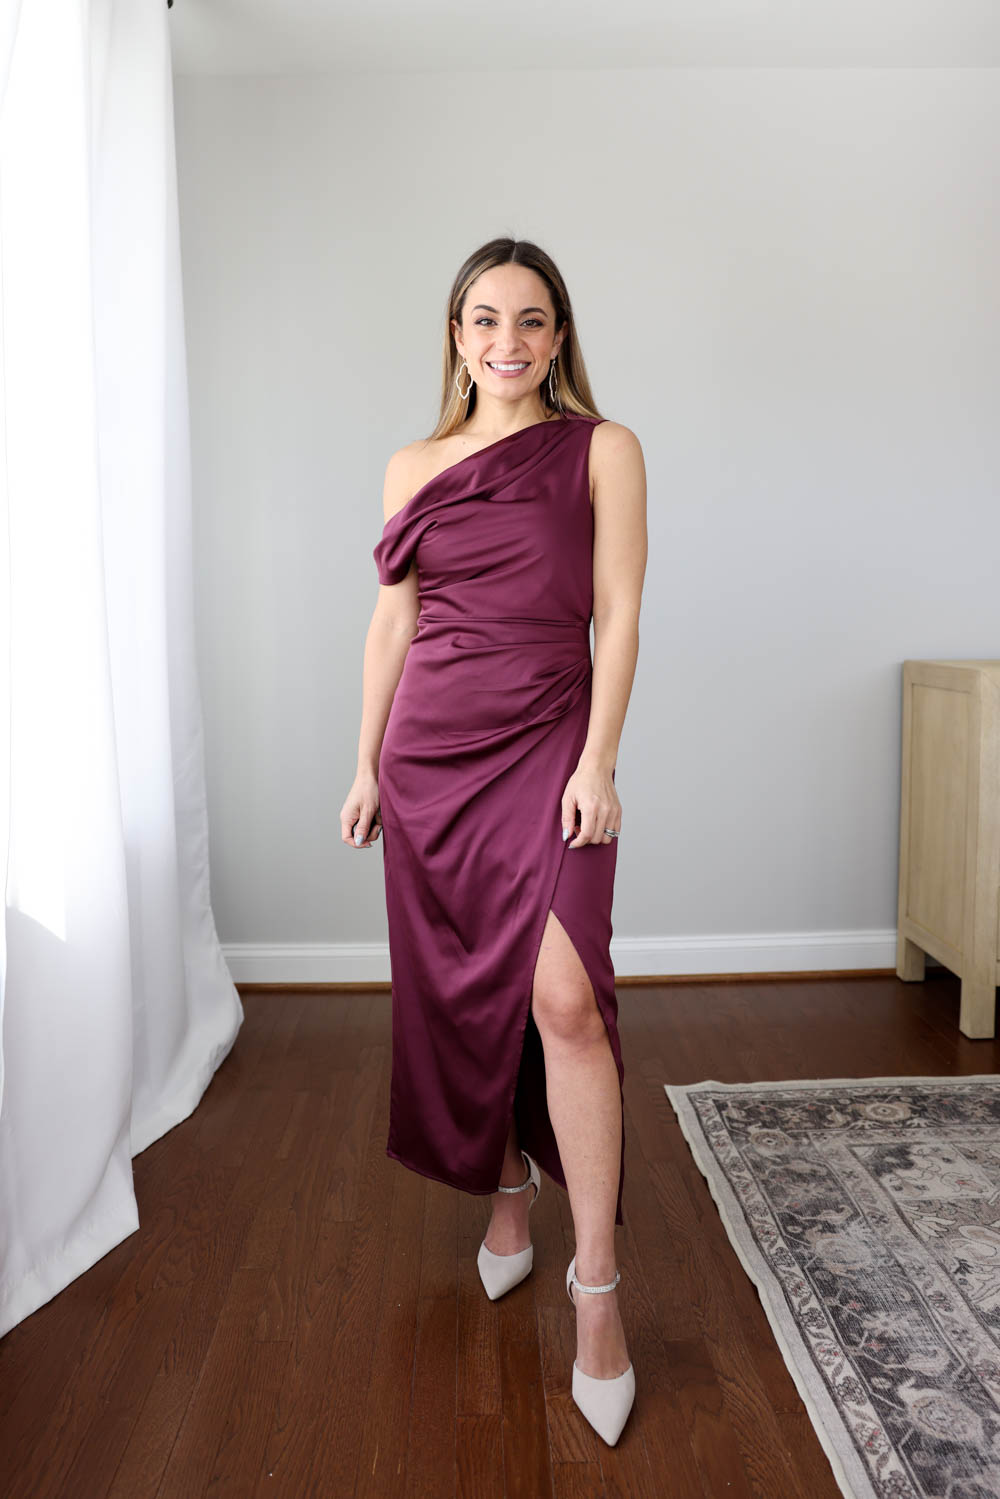 Warm Leggings To Wear Under Dresses For Wedding Guests